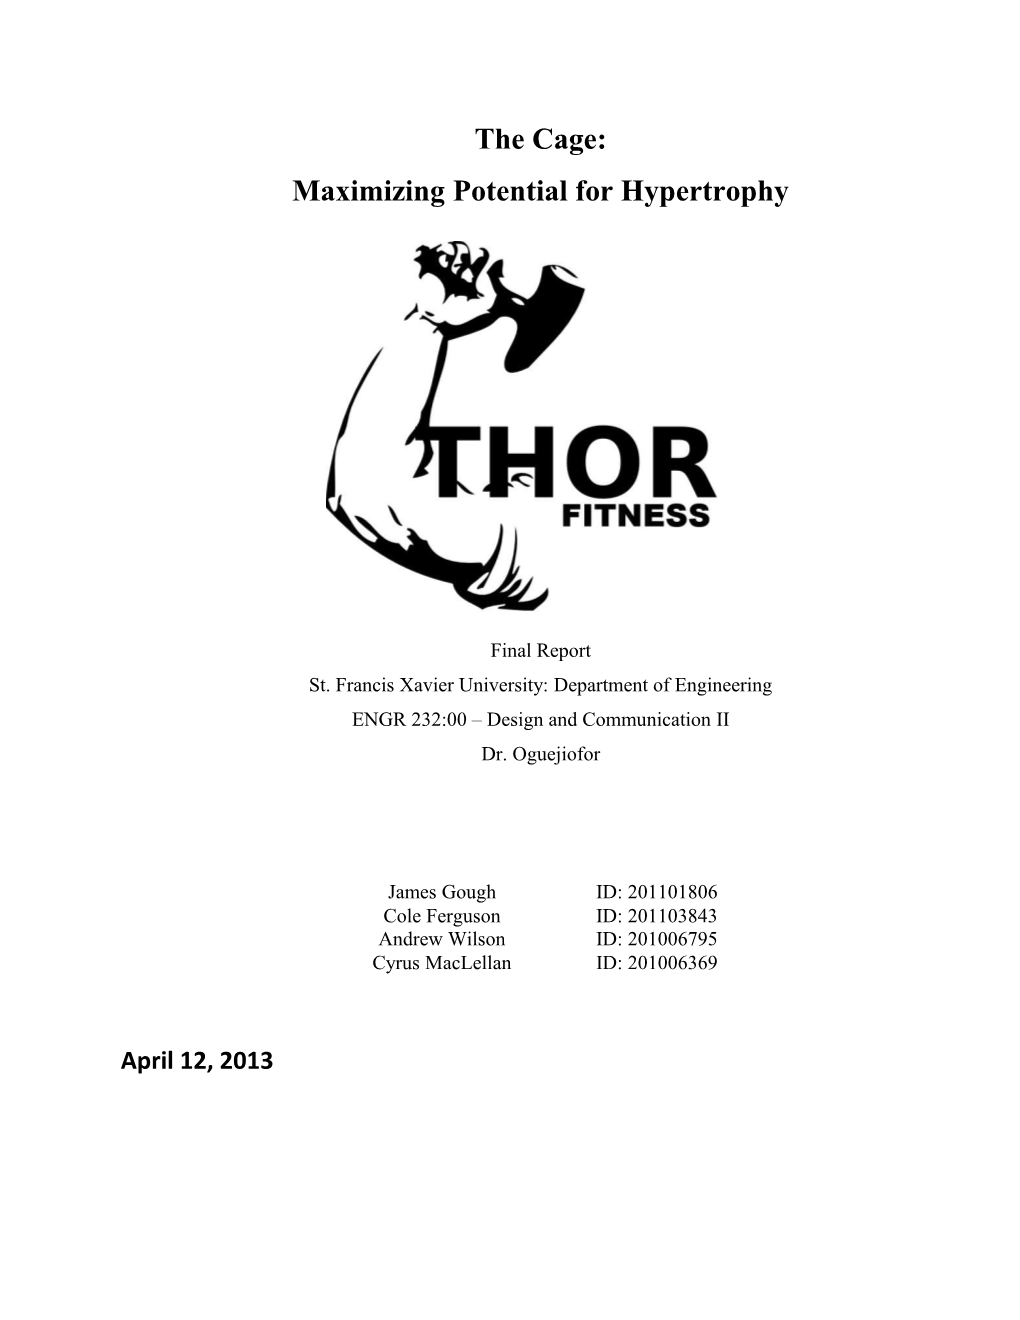 Maximizing Potential for Hypertrophy